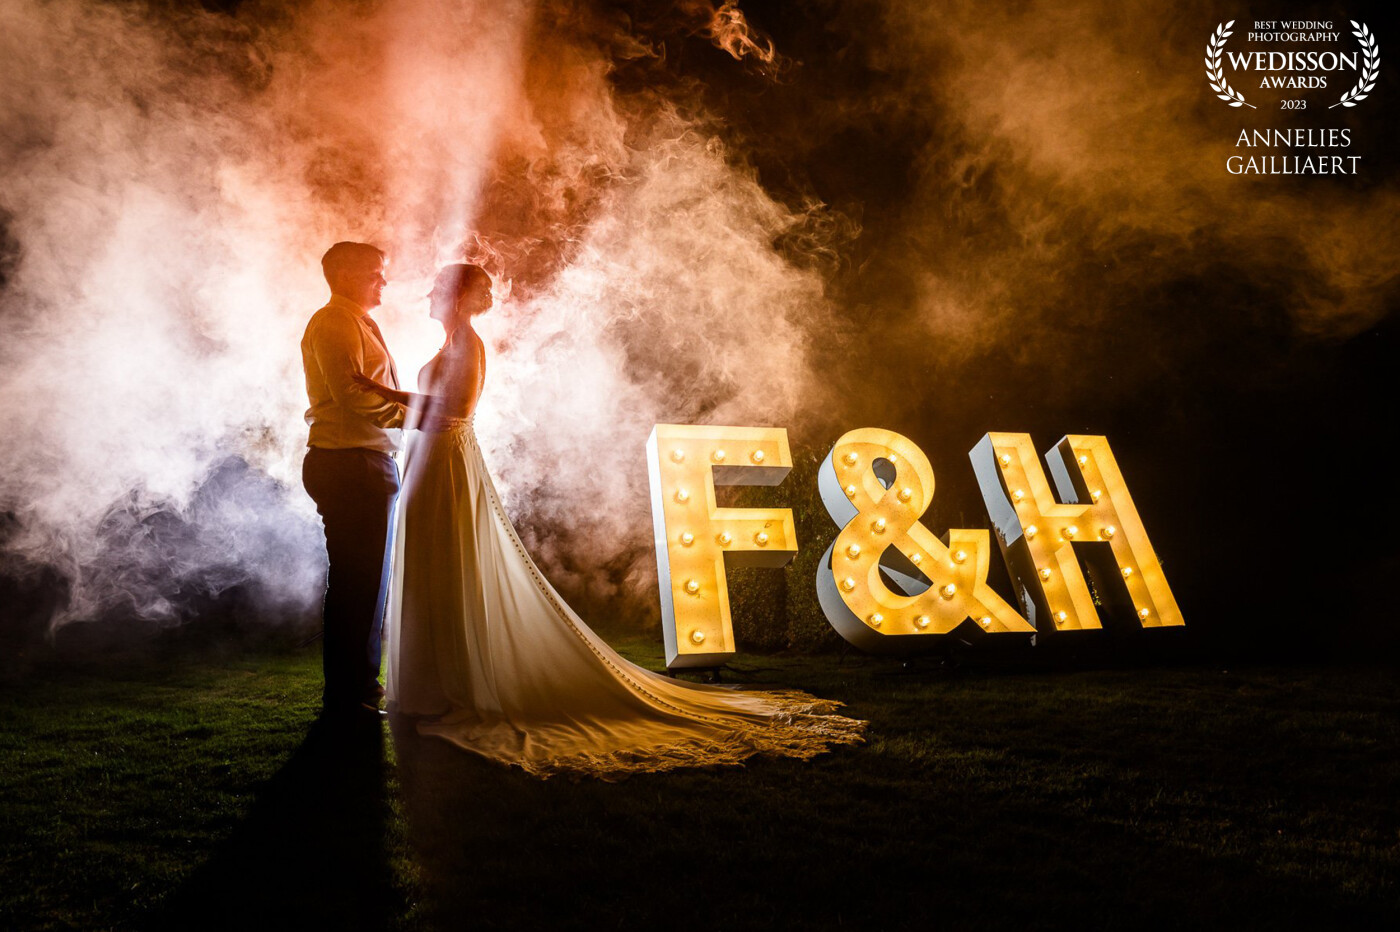 As the groom is a fireman, the use of a firebomb was perfectly fitting for a last photo with a bang.